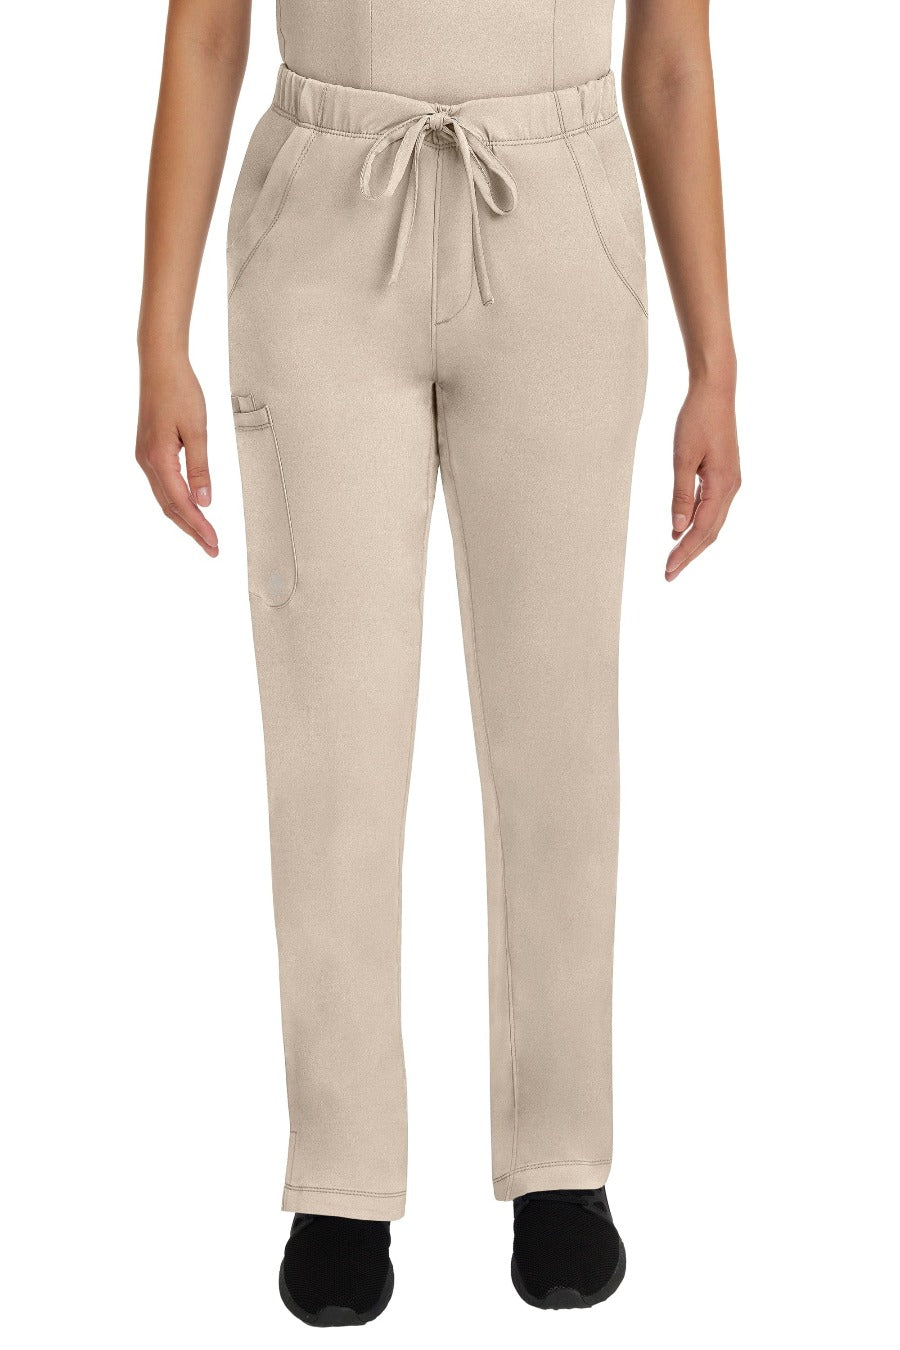 Healing Hands HH Works pants in Khaki from Coulee Scrubs